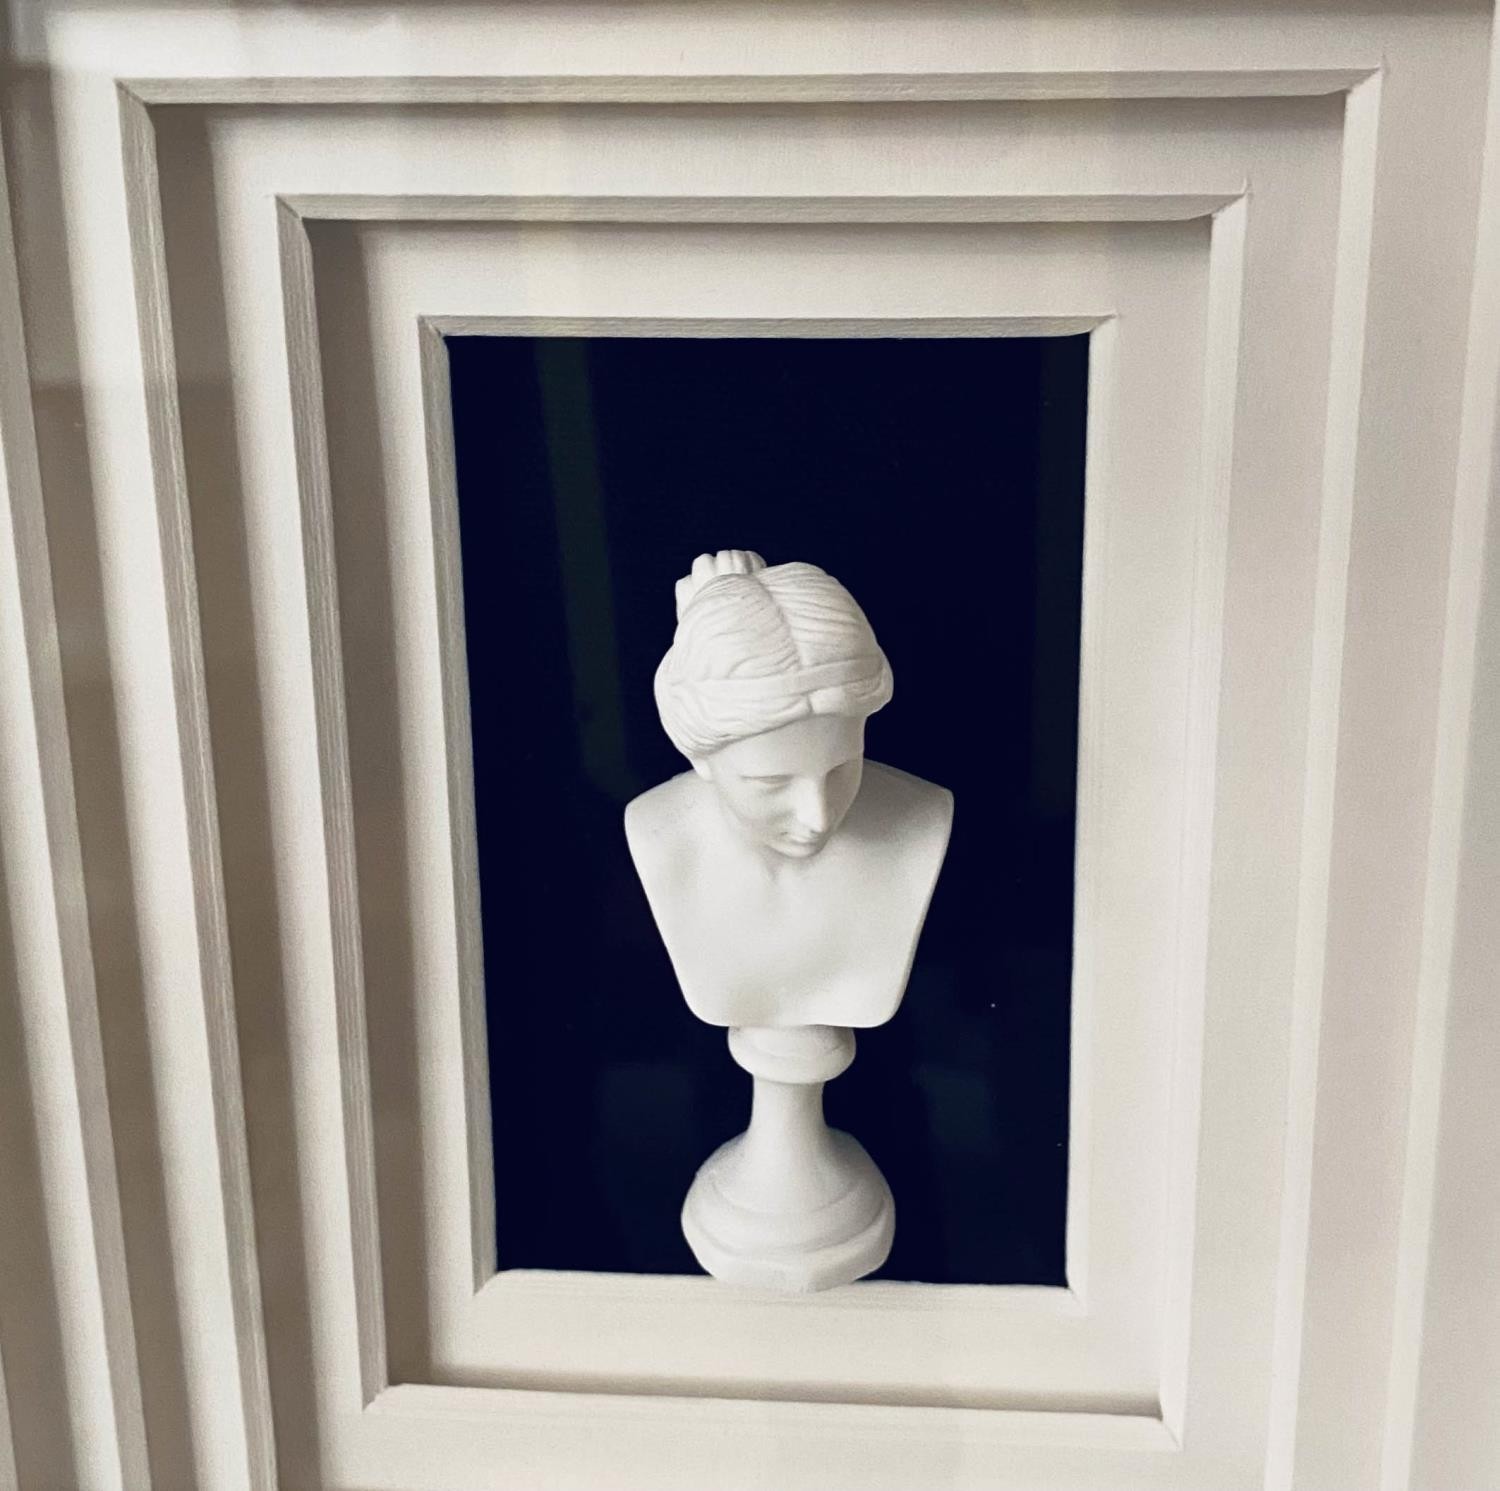 MINIATURE BUST DISPLAY, Classical style, framed and glazed, 110cm x 100cm. - Image 2 of 4